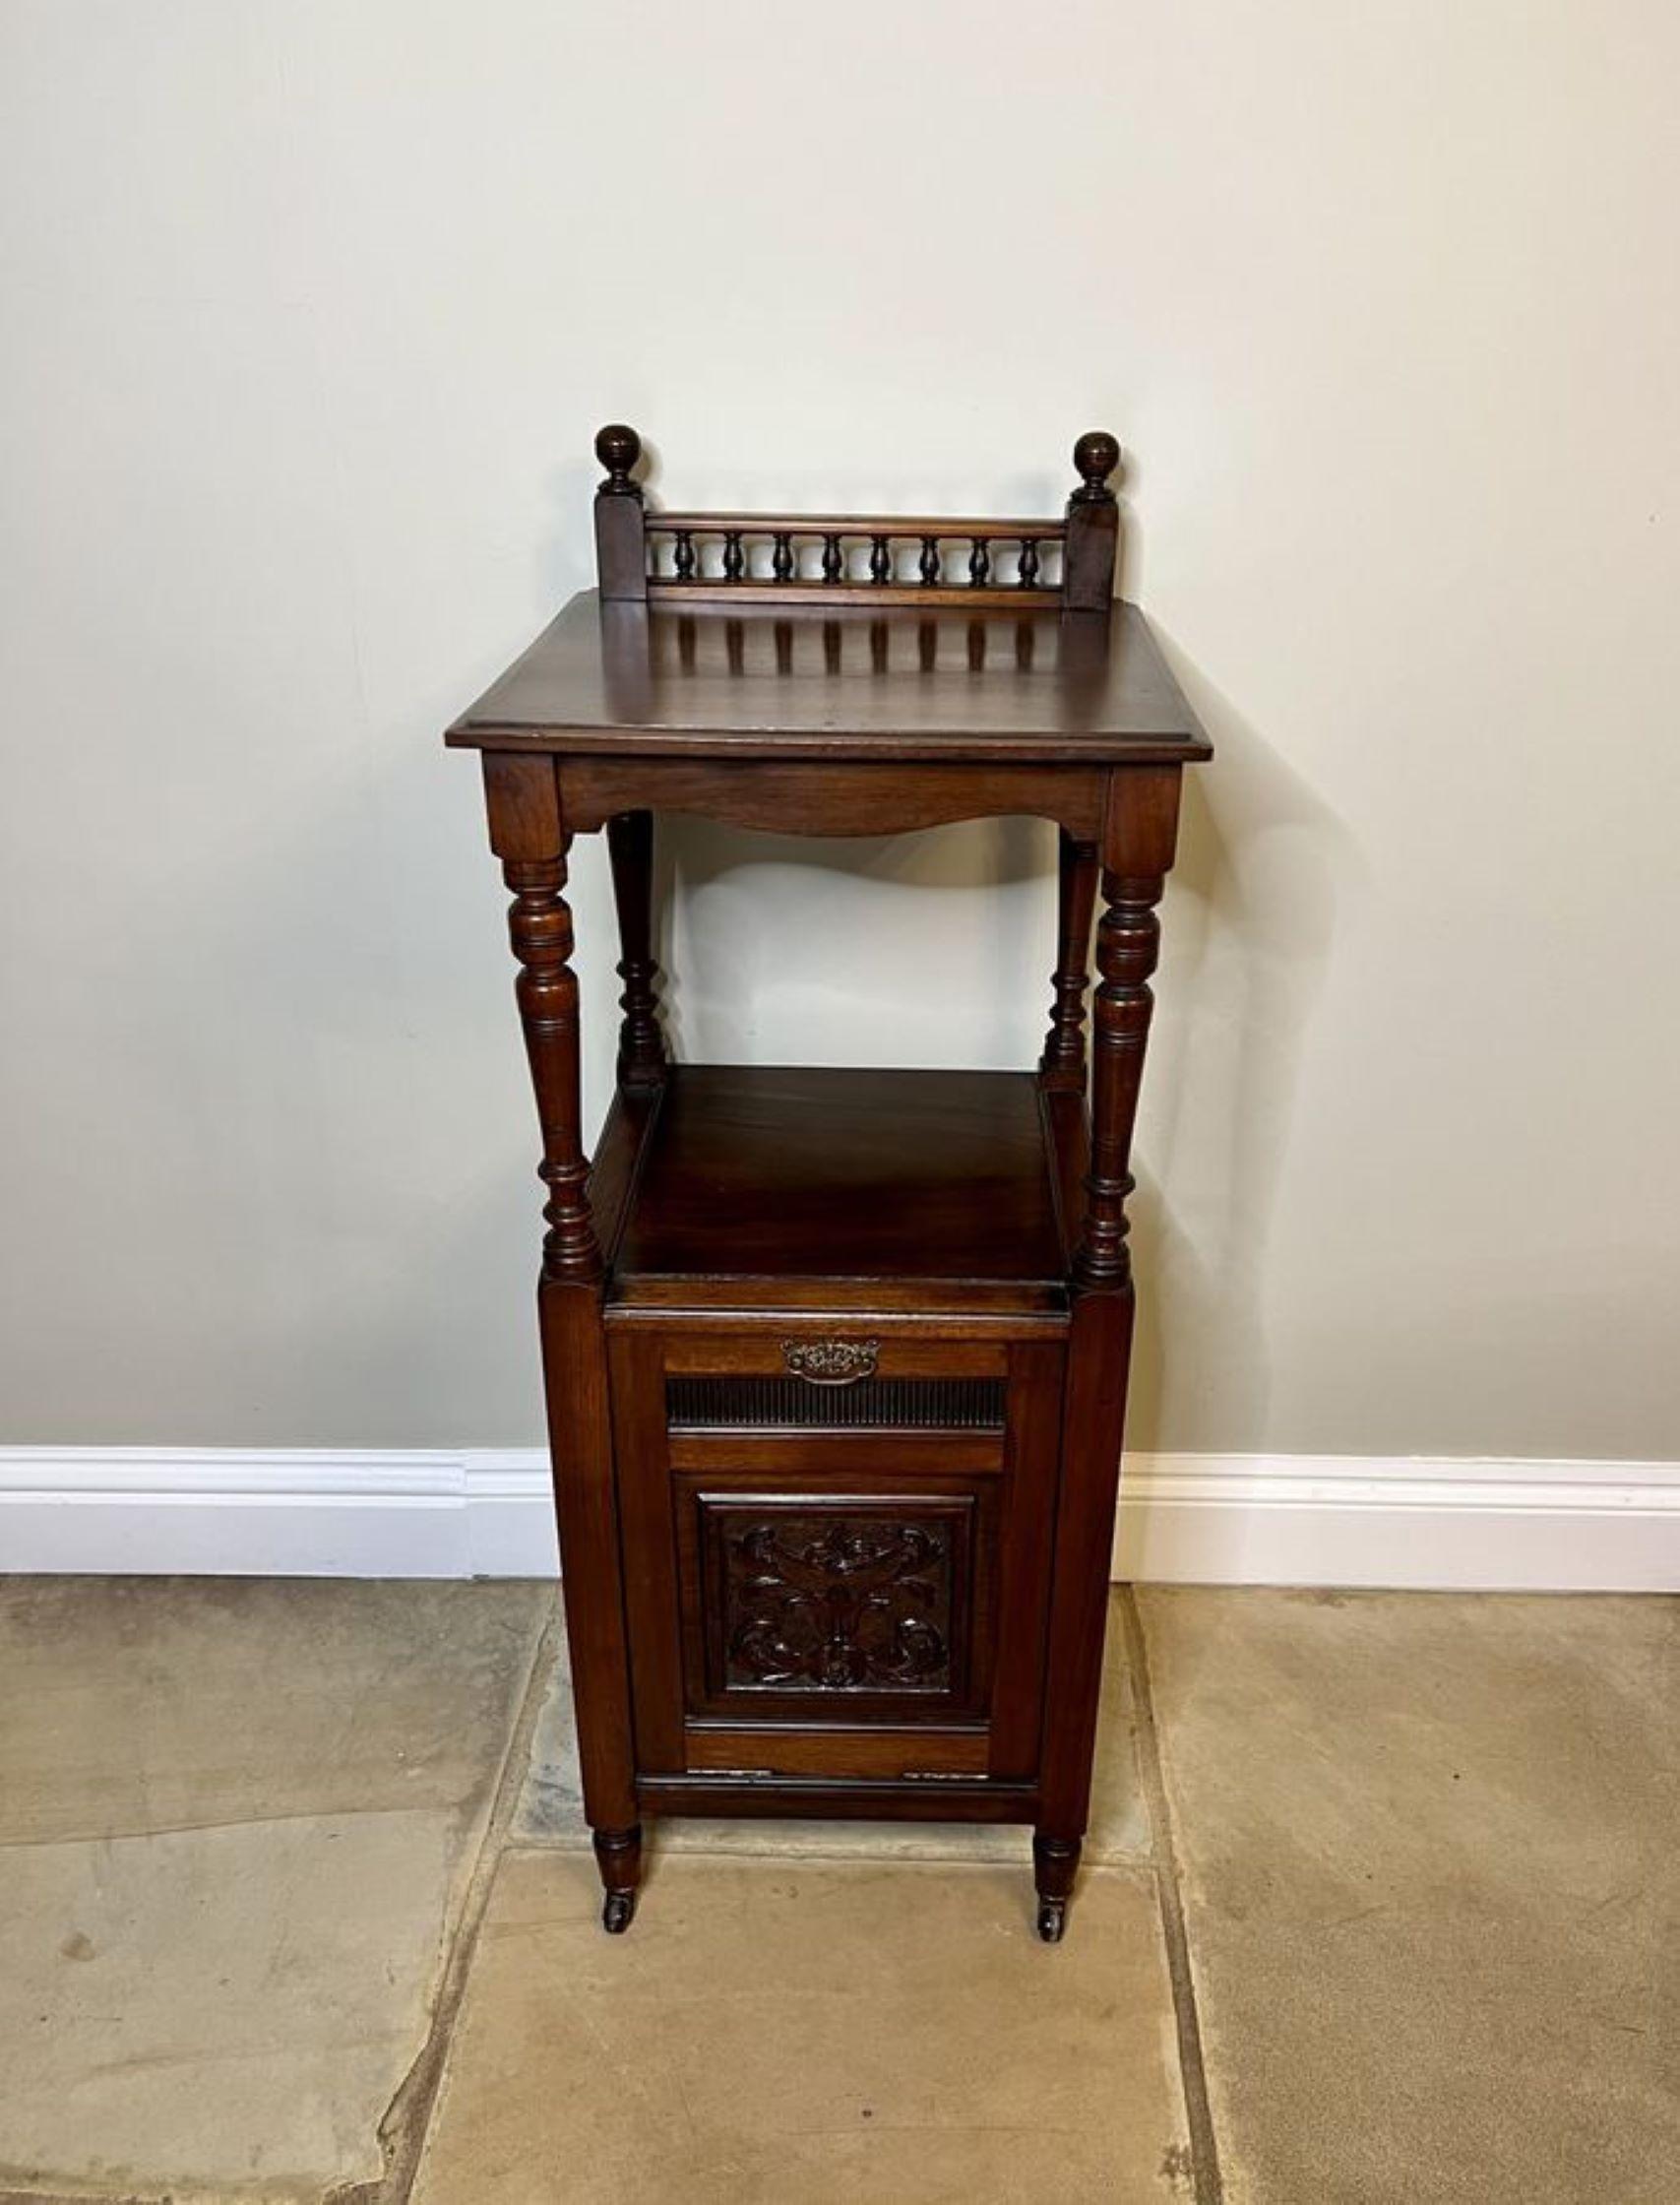 Antique Victorian quality carved mahogany coal box having a quality mahogany top with a gallery back supported by turned columns above a carved mahogany pull down front with the original brass handle opening to reveal a compartment for coal,